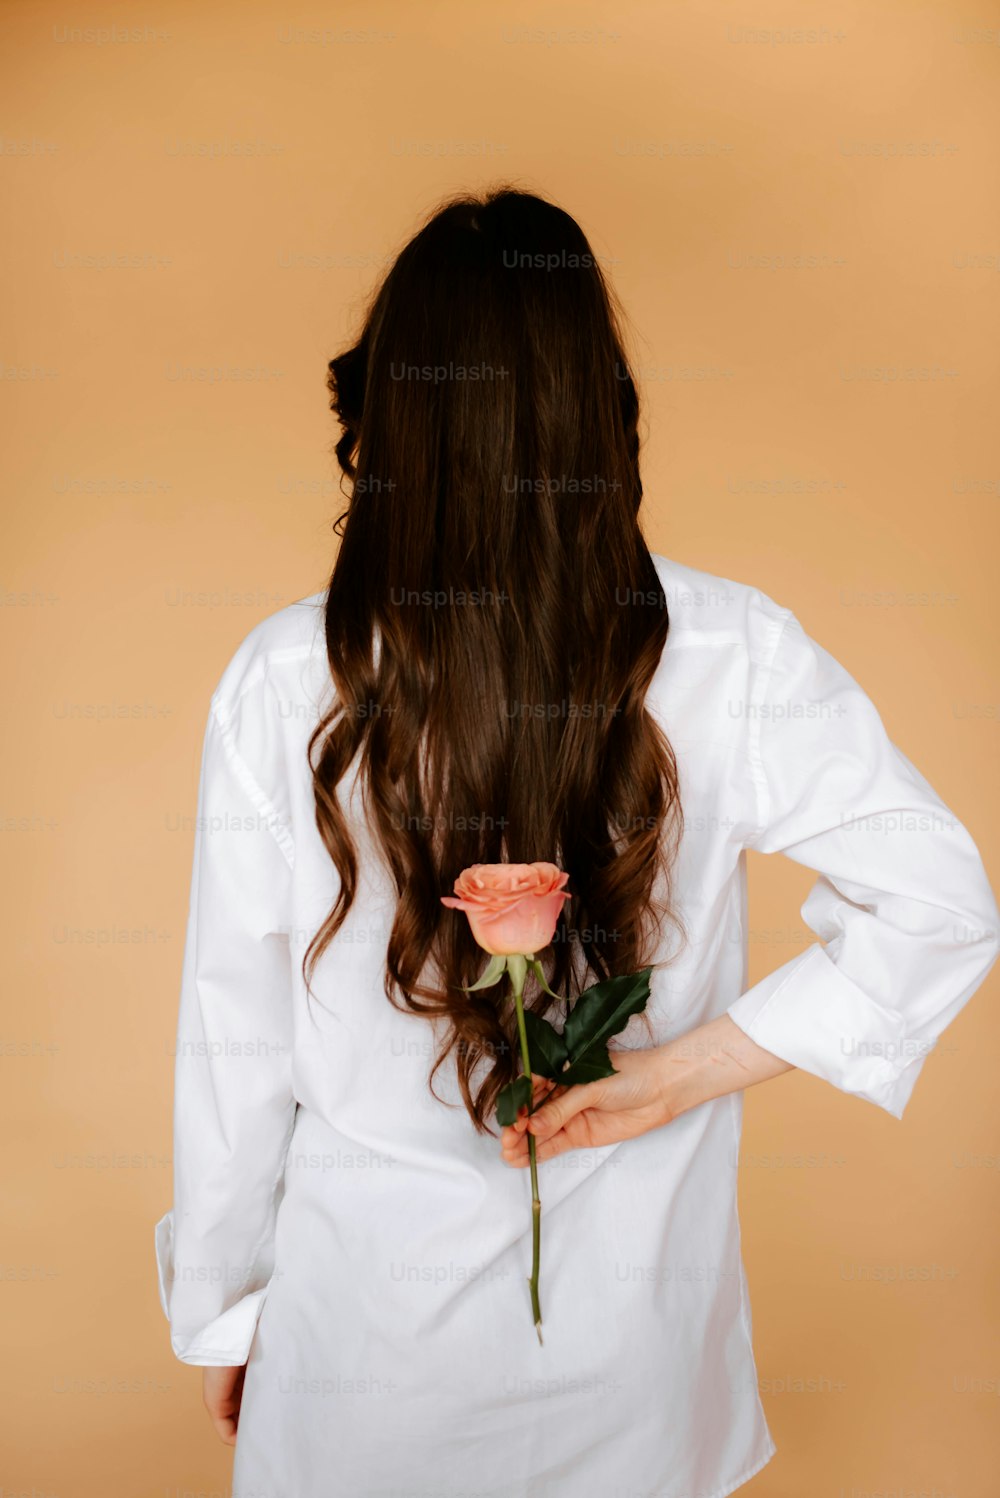 a woman with long hair holding a rose